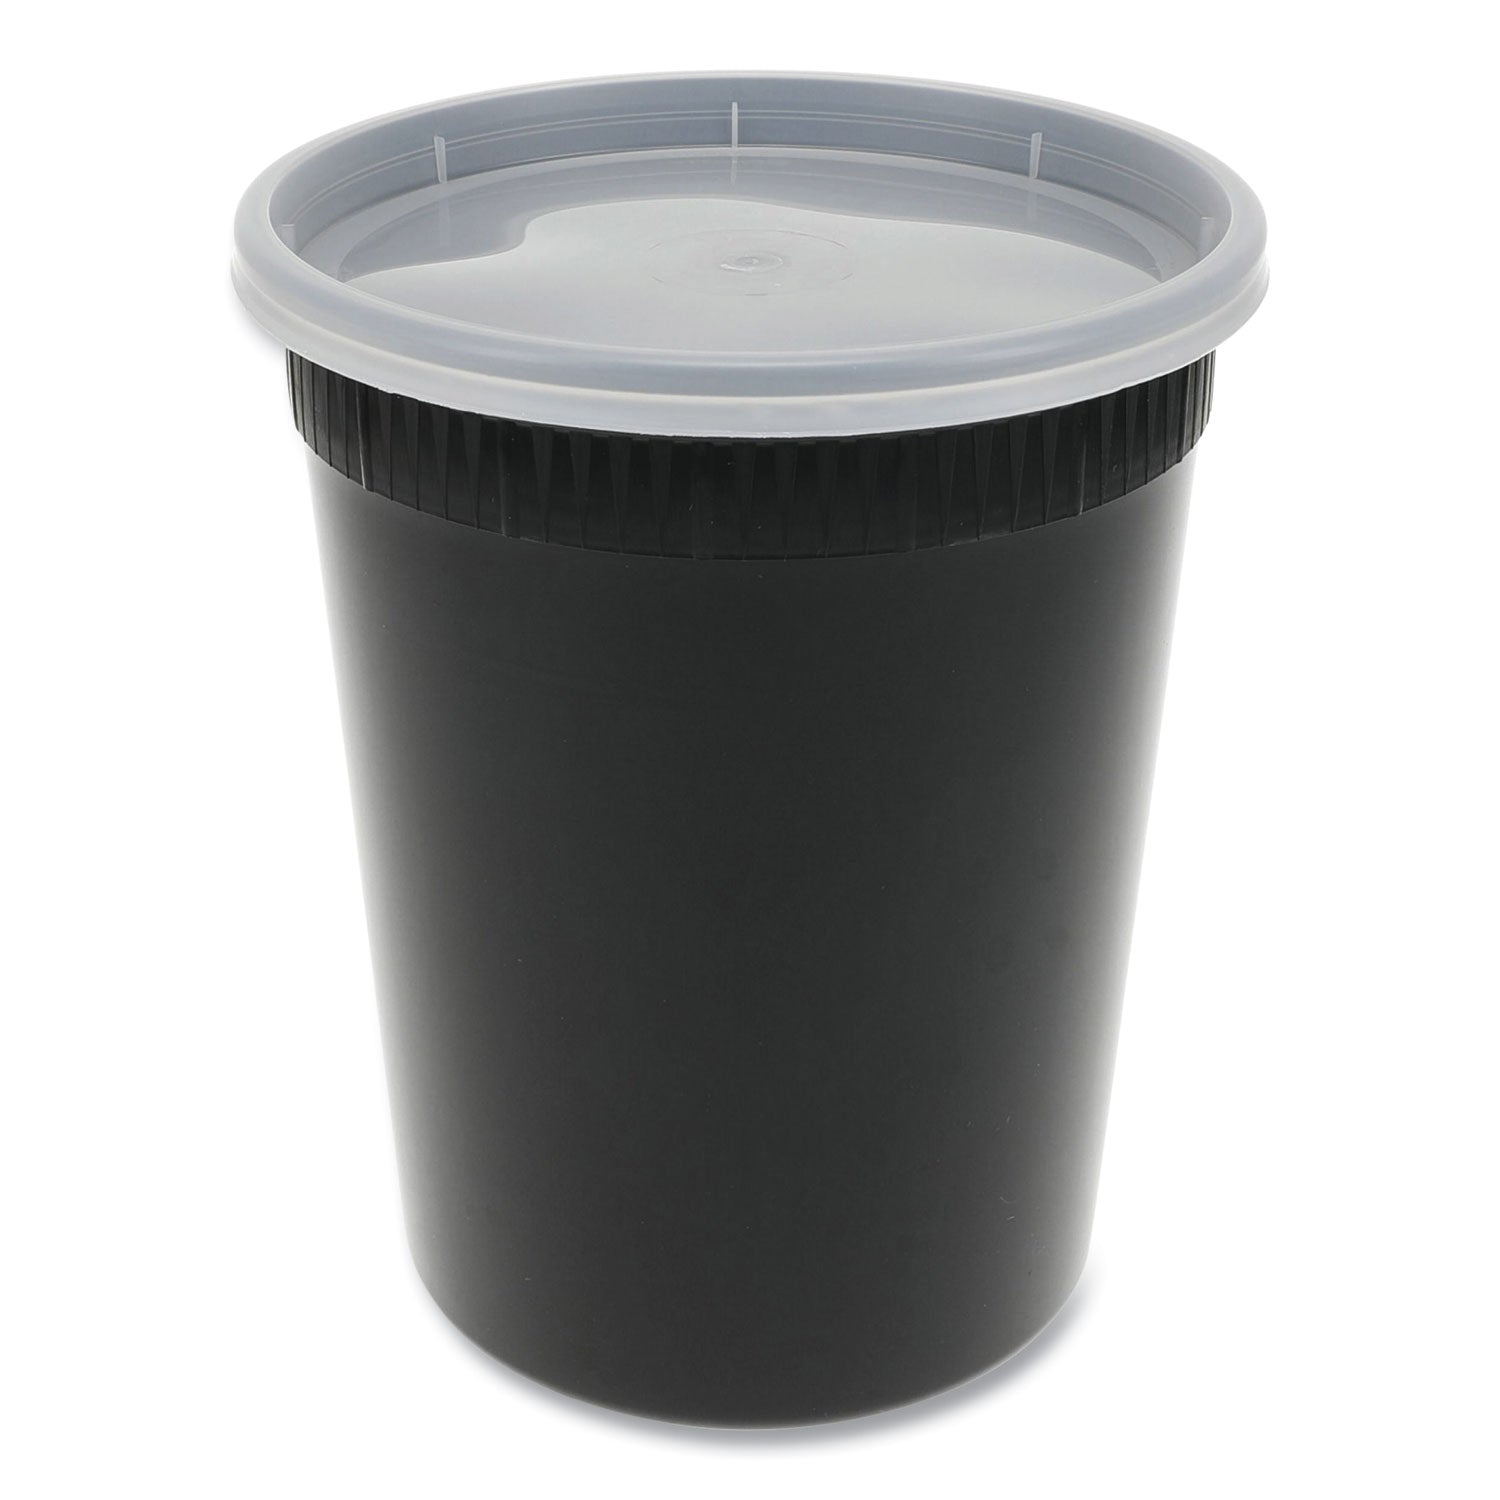 newspring-delitainer-microwavable-container-32-oz-455-x-455-x-555-black-clear-plastic-240-carton_pctysd2532b - 1